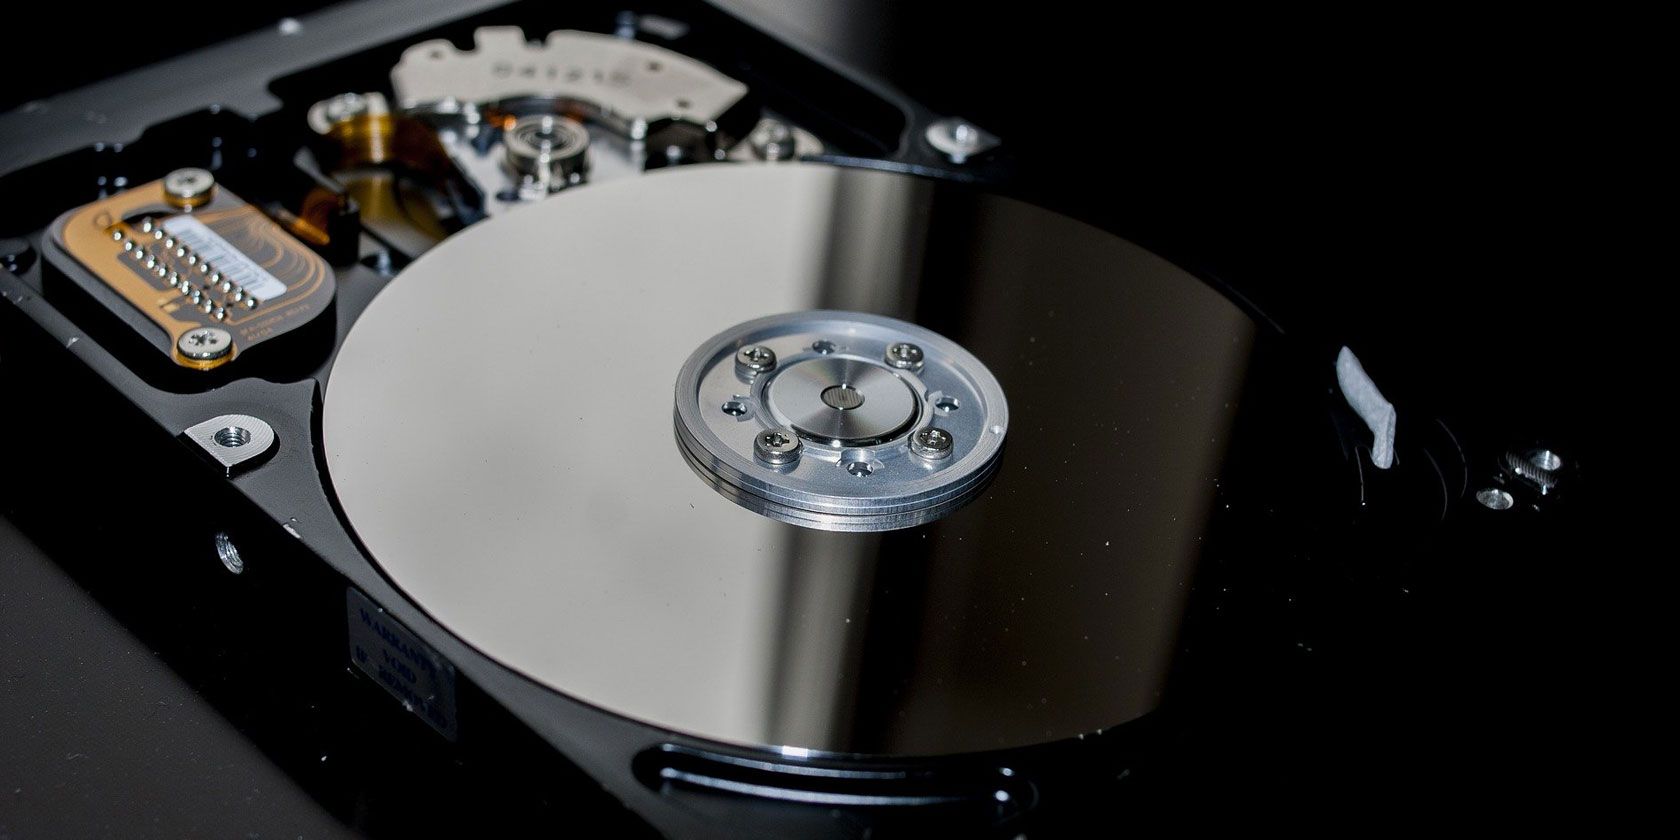 The 7 Most Reliable Hard Drives According To Server Companies